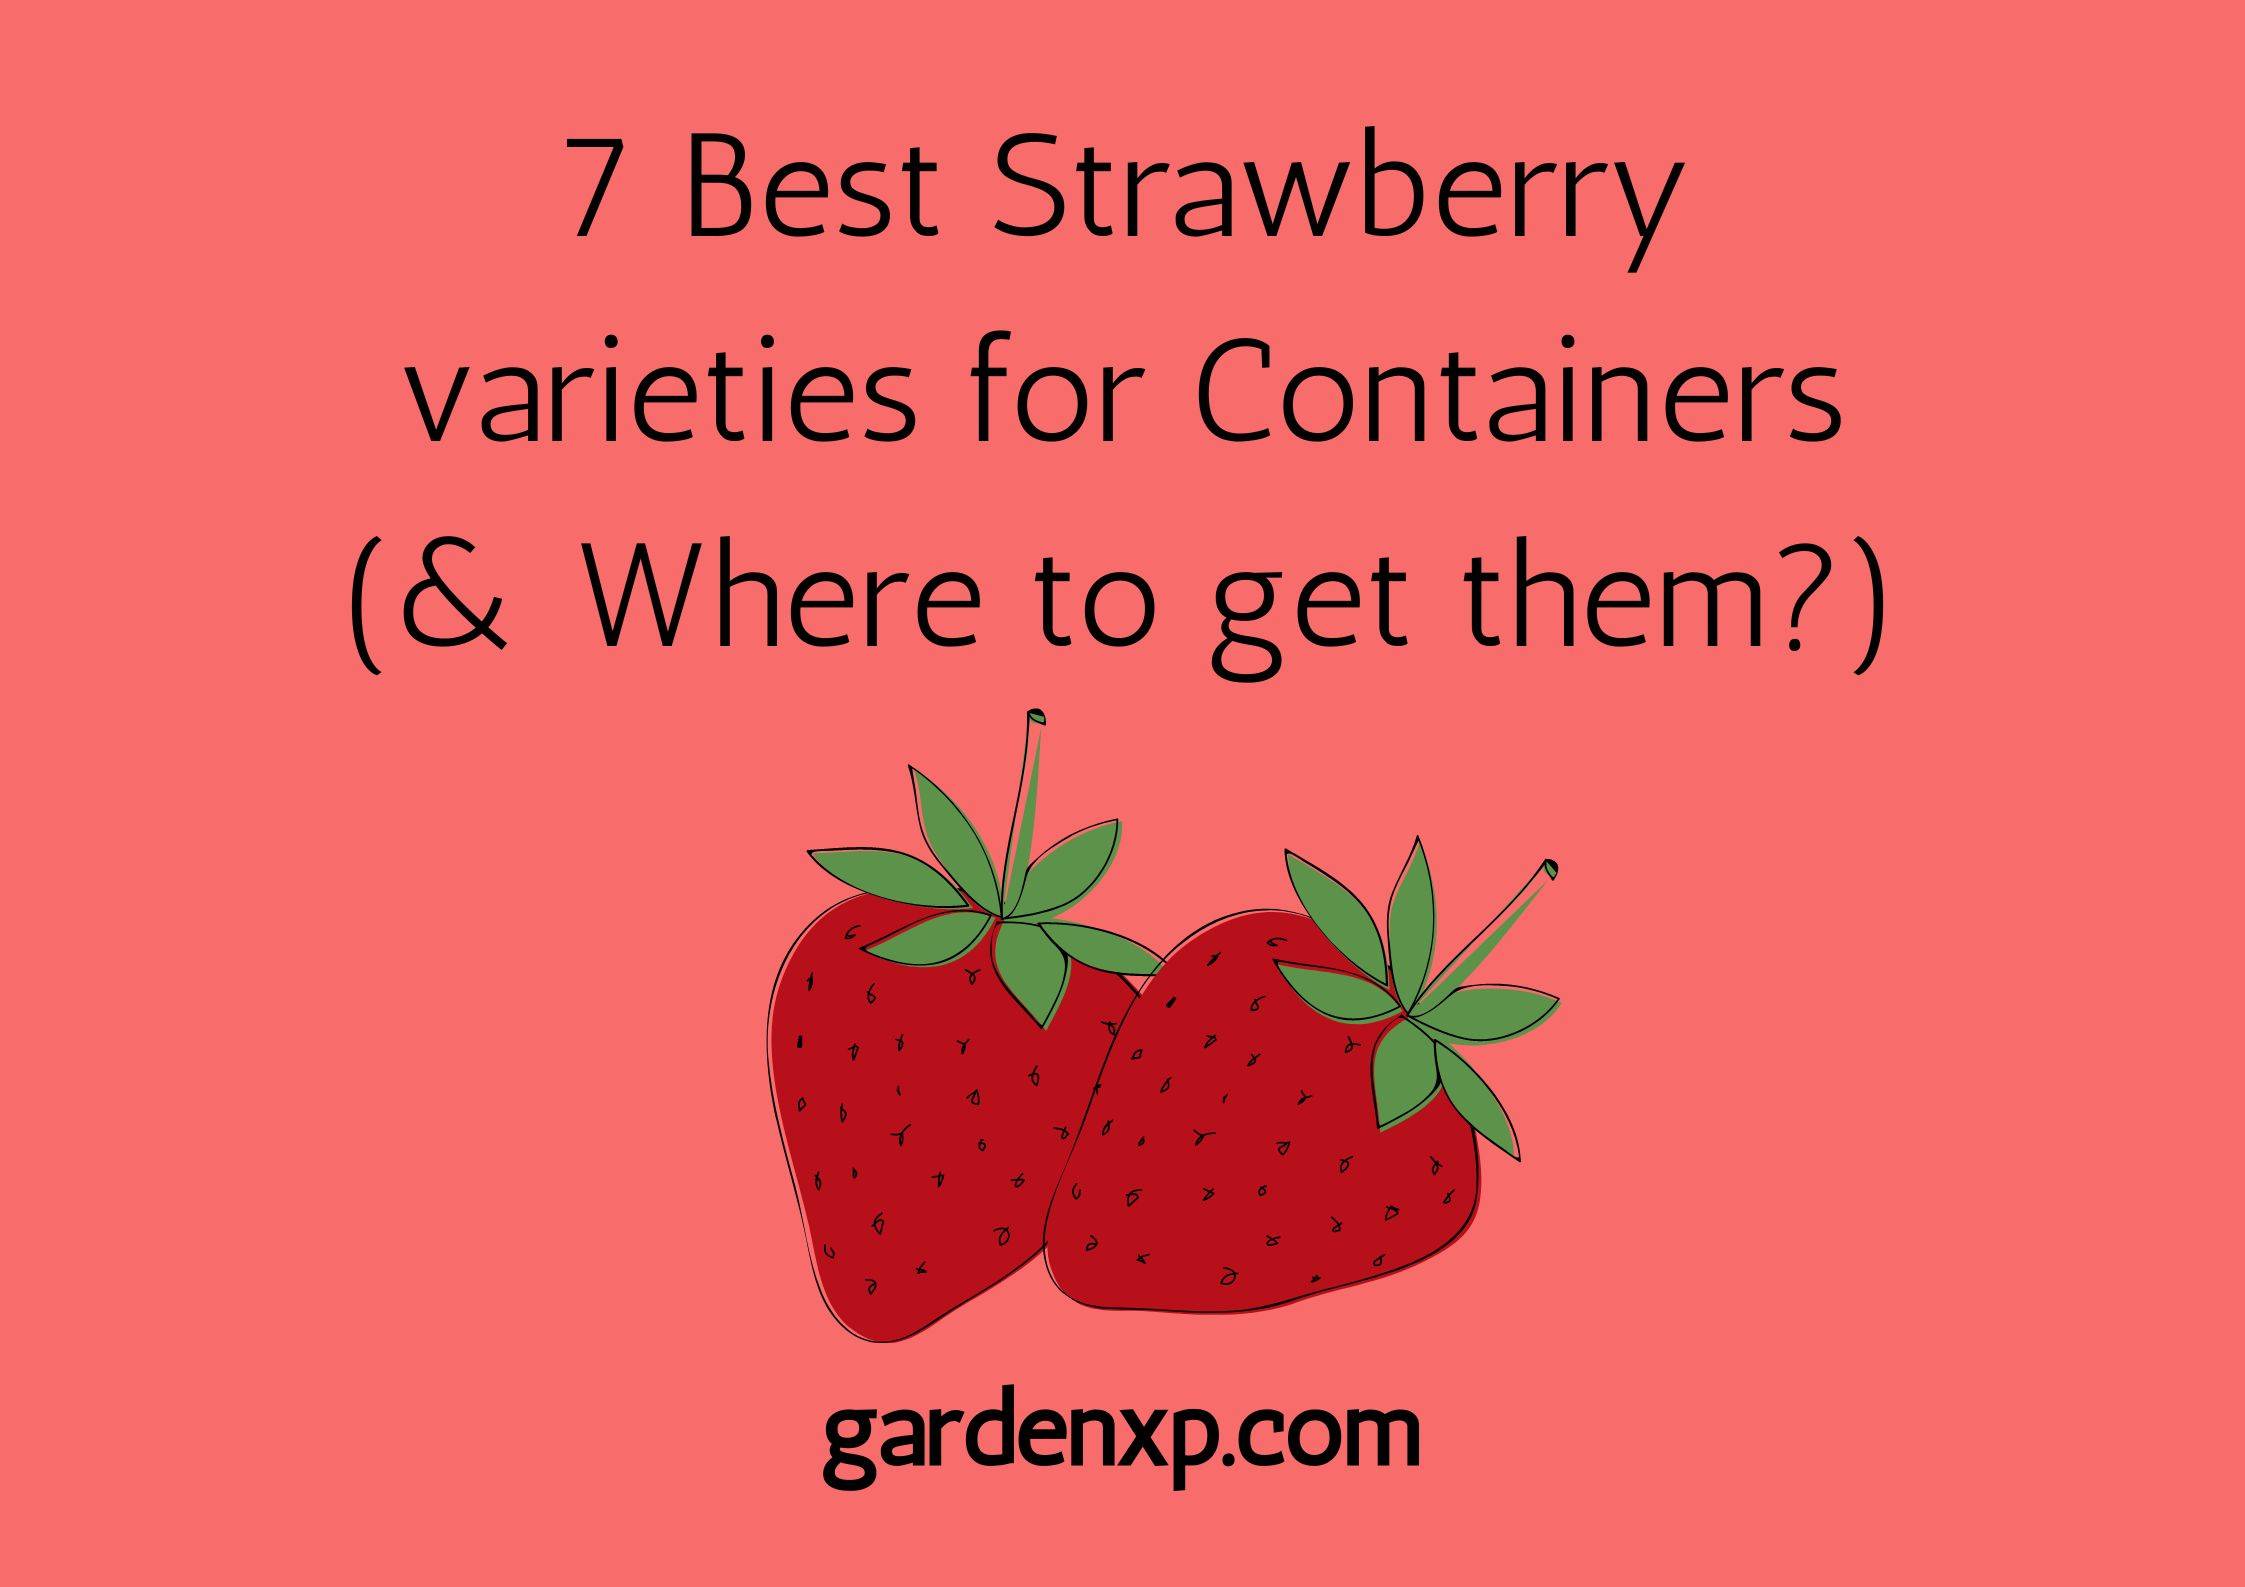 7 Best Strawberry varieties for Containers (& Where to get them?)